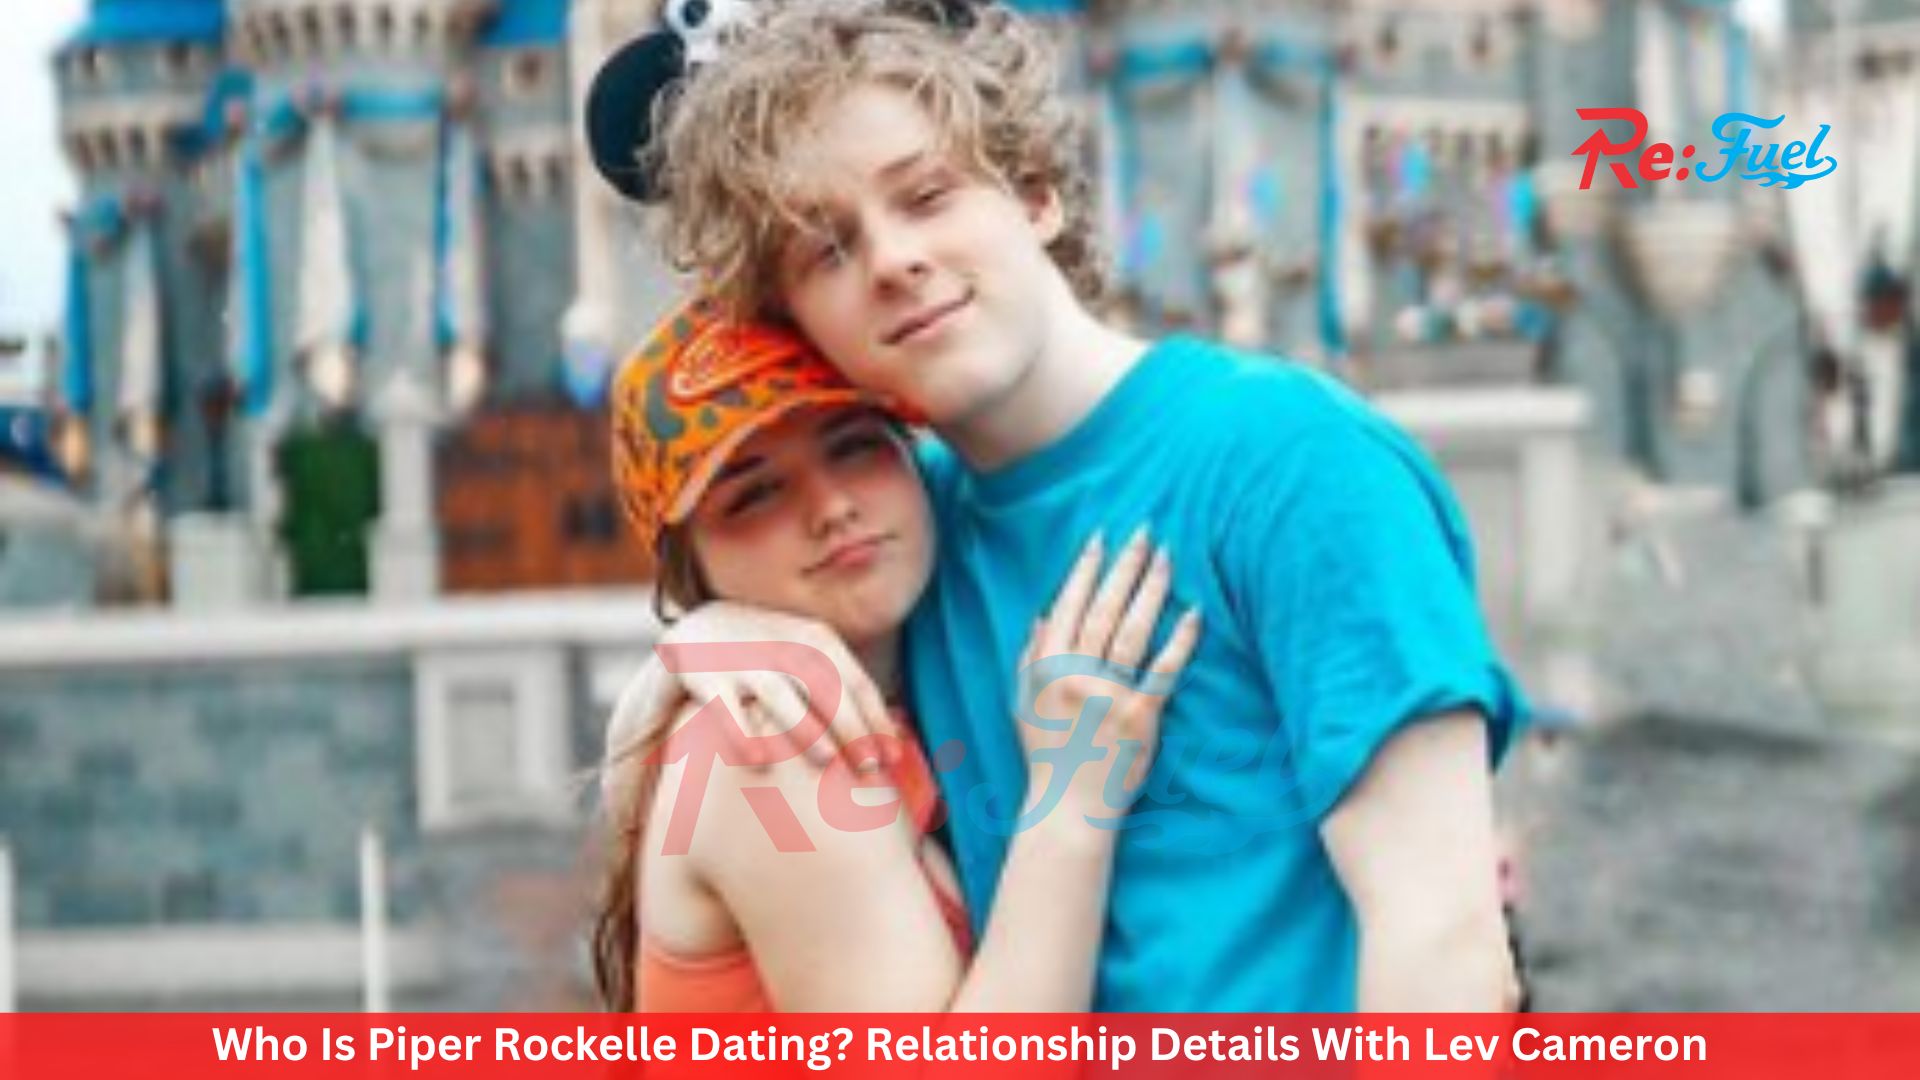 Who Is Piper Rockelle Dating? Relationship Details With Lev Cameron